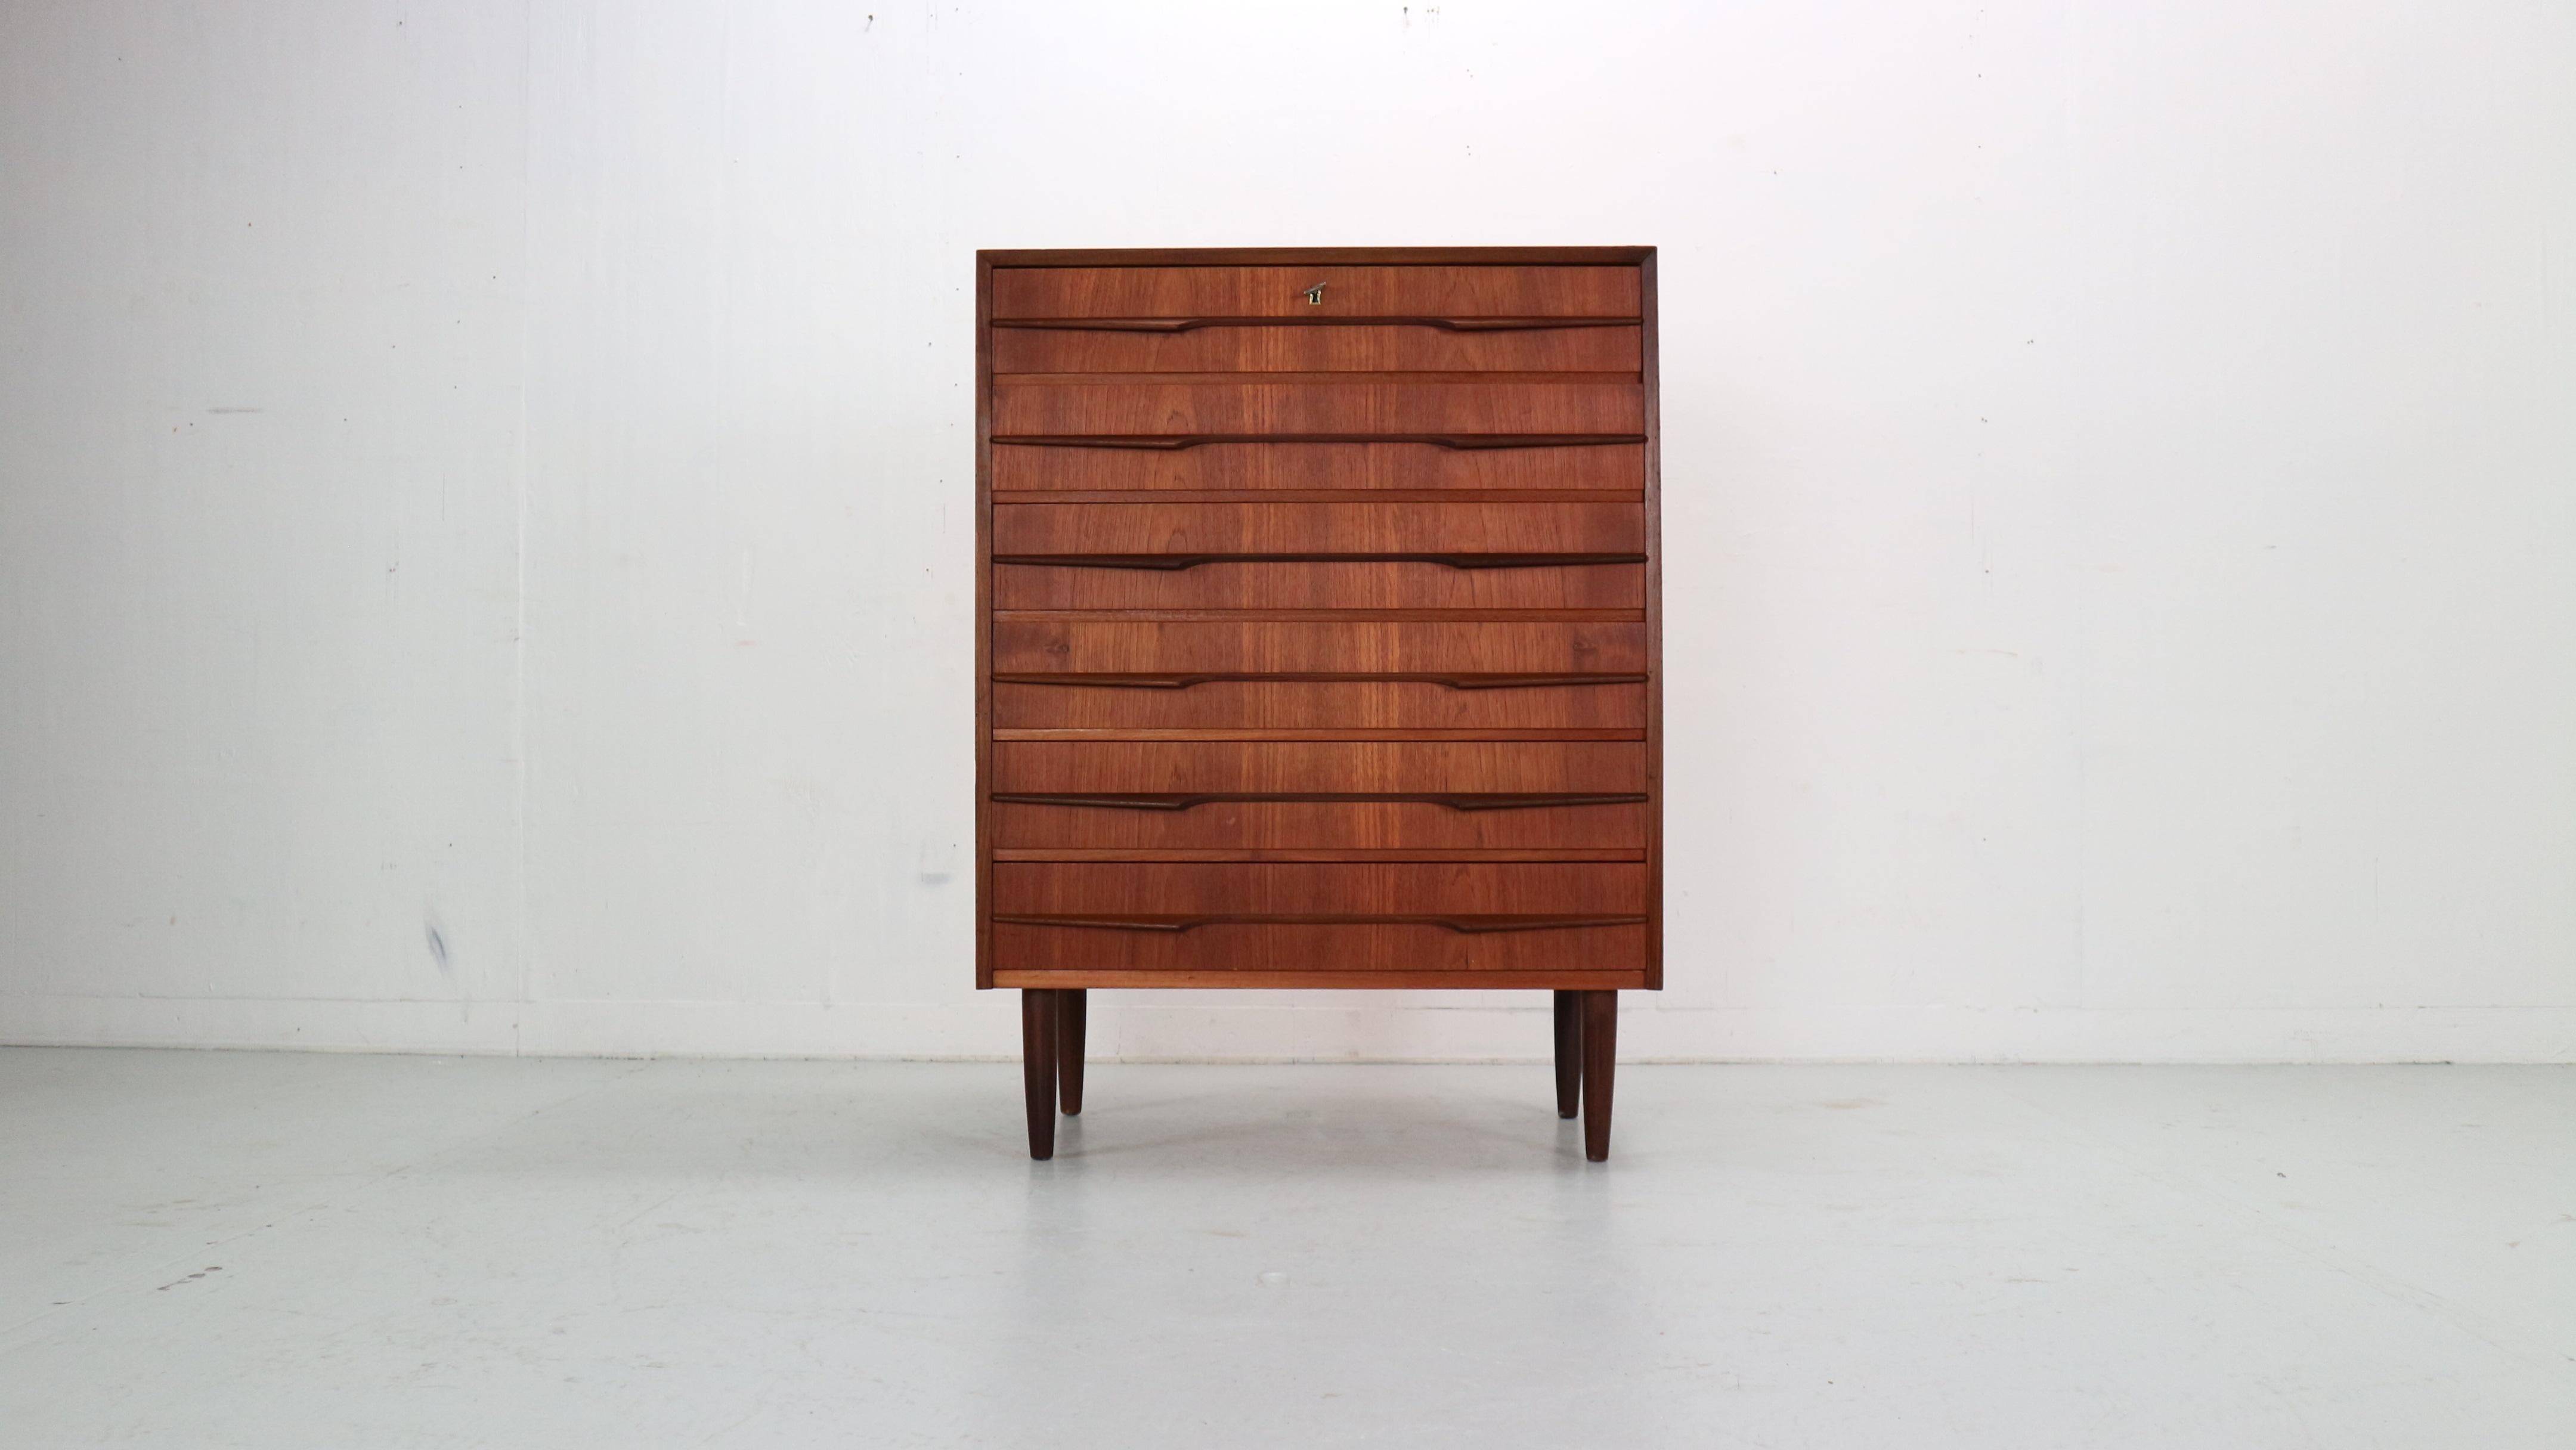 Mid- Century modern period chest of 6 drawers or tallboy cabinet made in 1960's Denmark.

Made of teak wood veneer. Elegant handles, original key with working lock on the upper drawer.
High quality Danish furniture.

The cabinet is in a good vintage